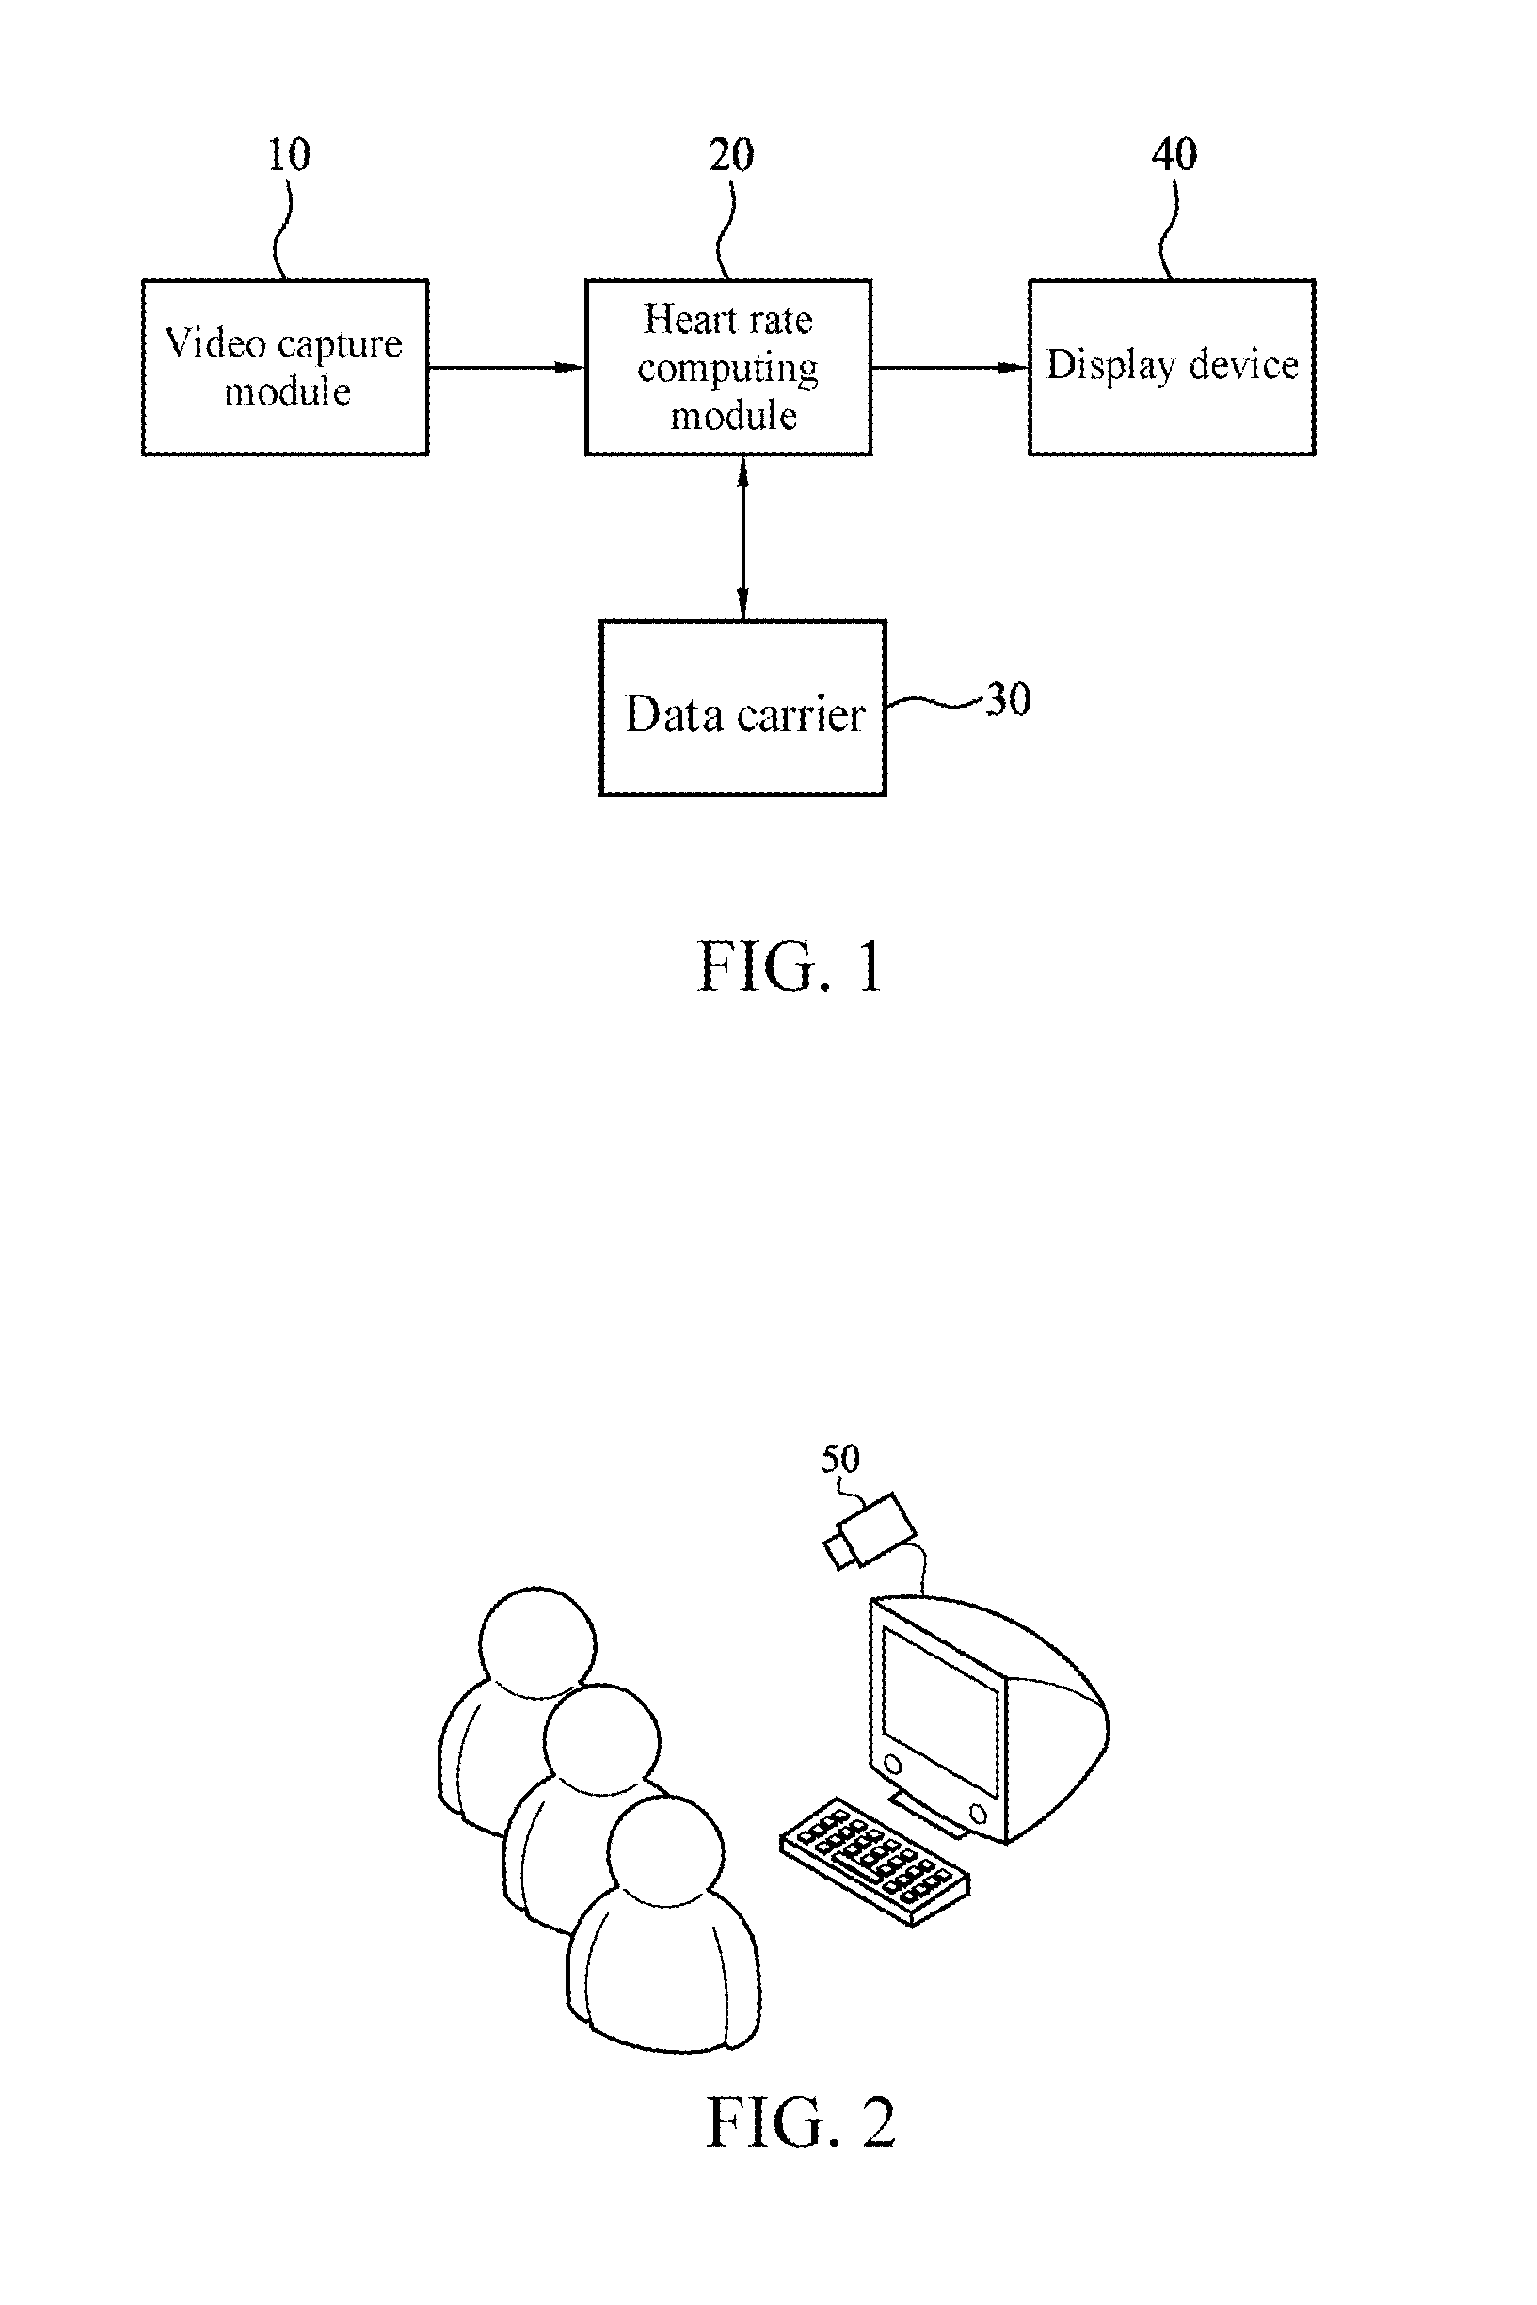 Method and system for contact-free heart rate measurement